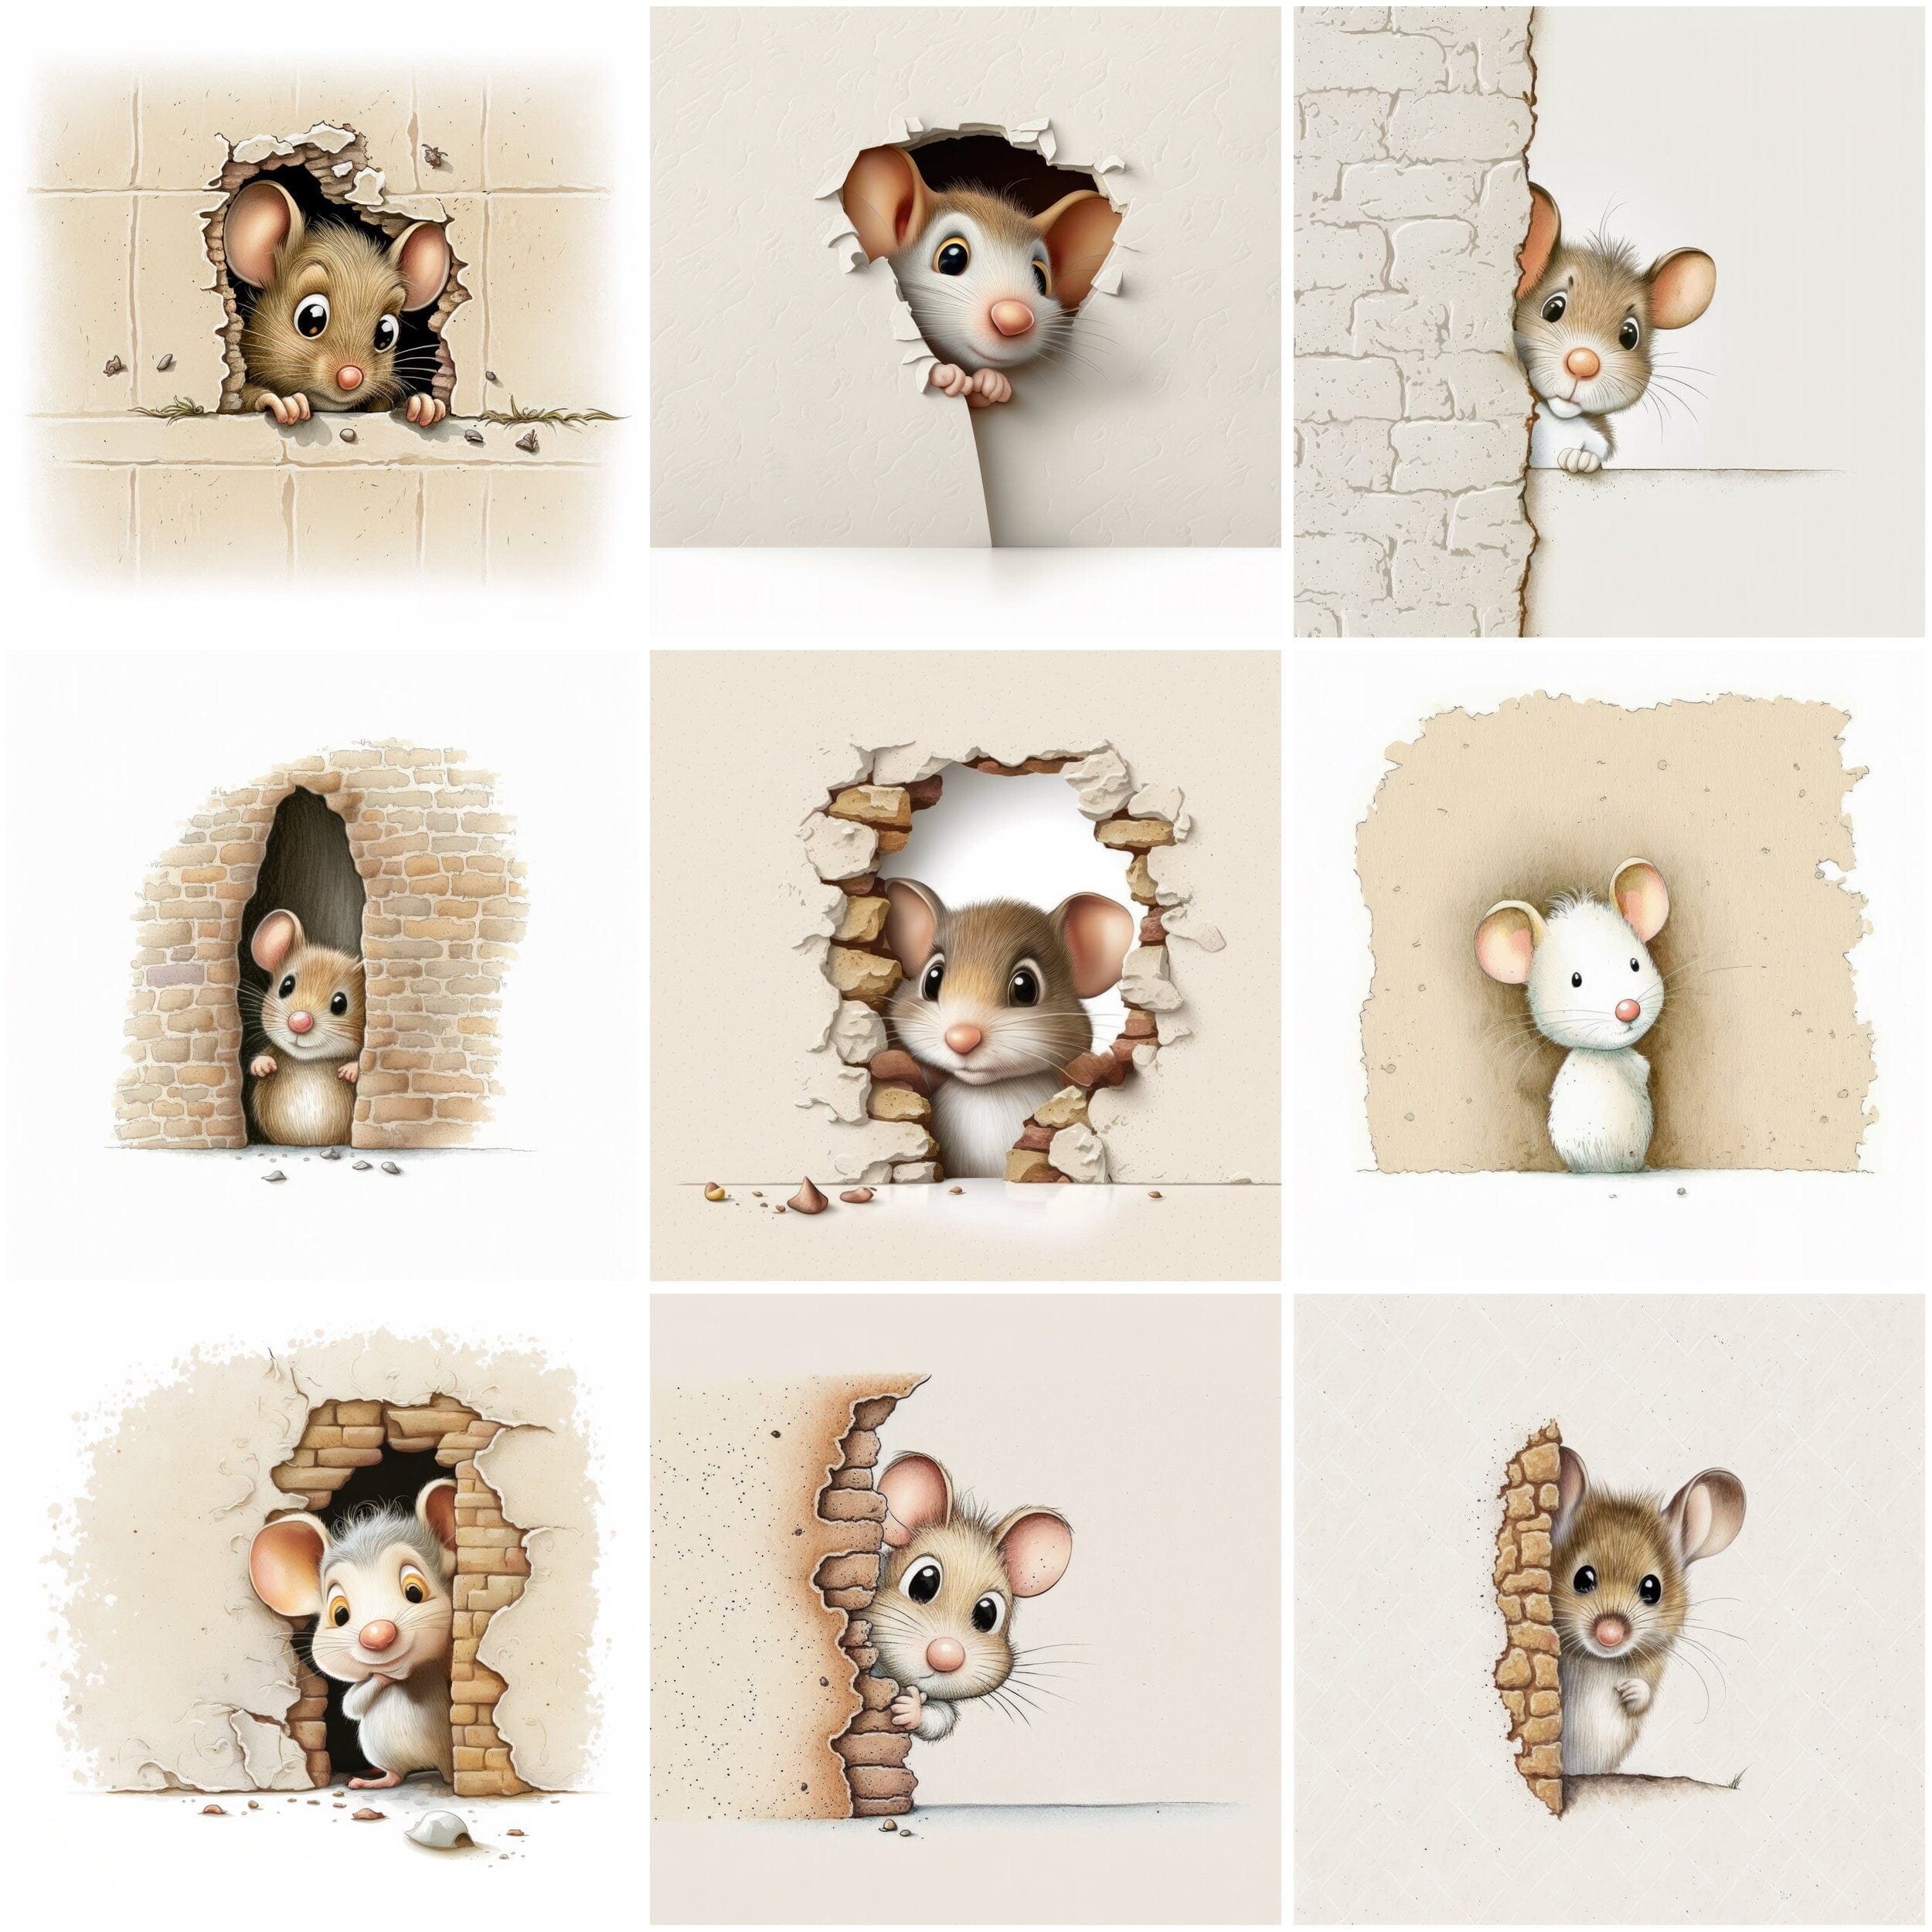 Hidden Mice Wall Art Bundle - 85 Playful and Whimsical Mouse Illustrations for Home Decor, DIY Projects, and Gifts - Commercial Use - Bundle Digital Download Sumobundle